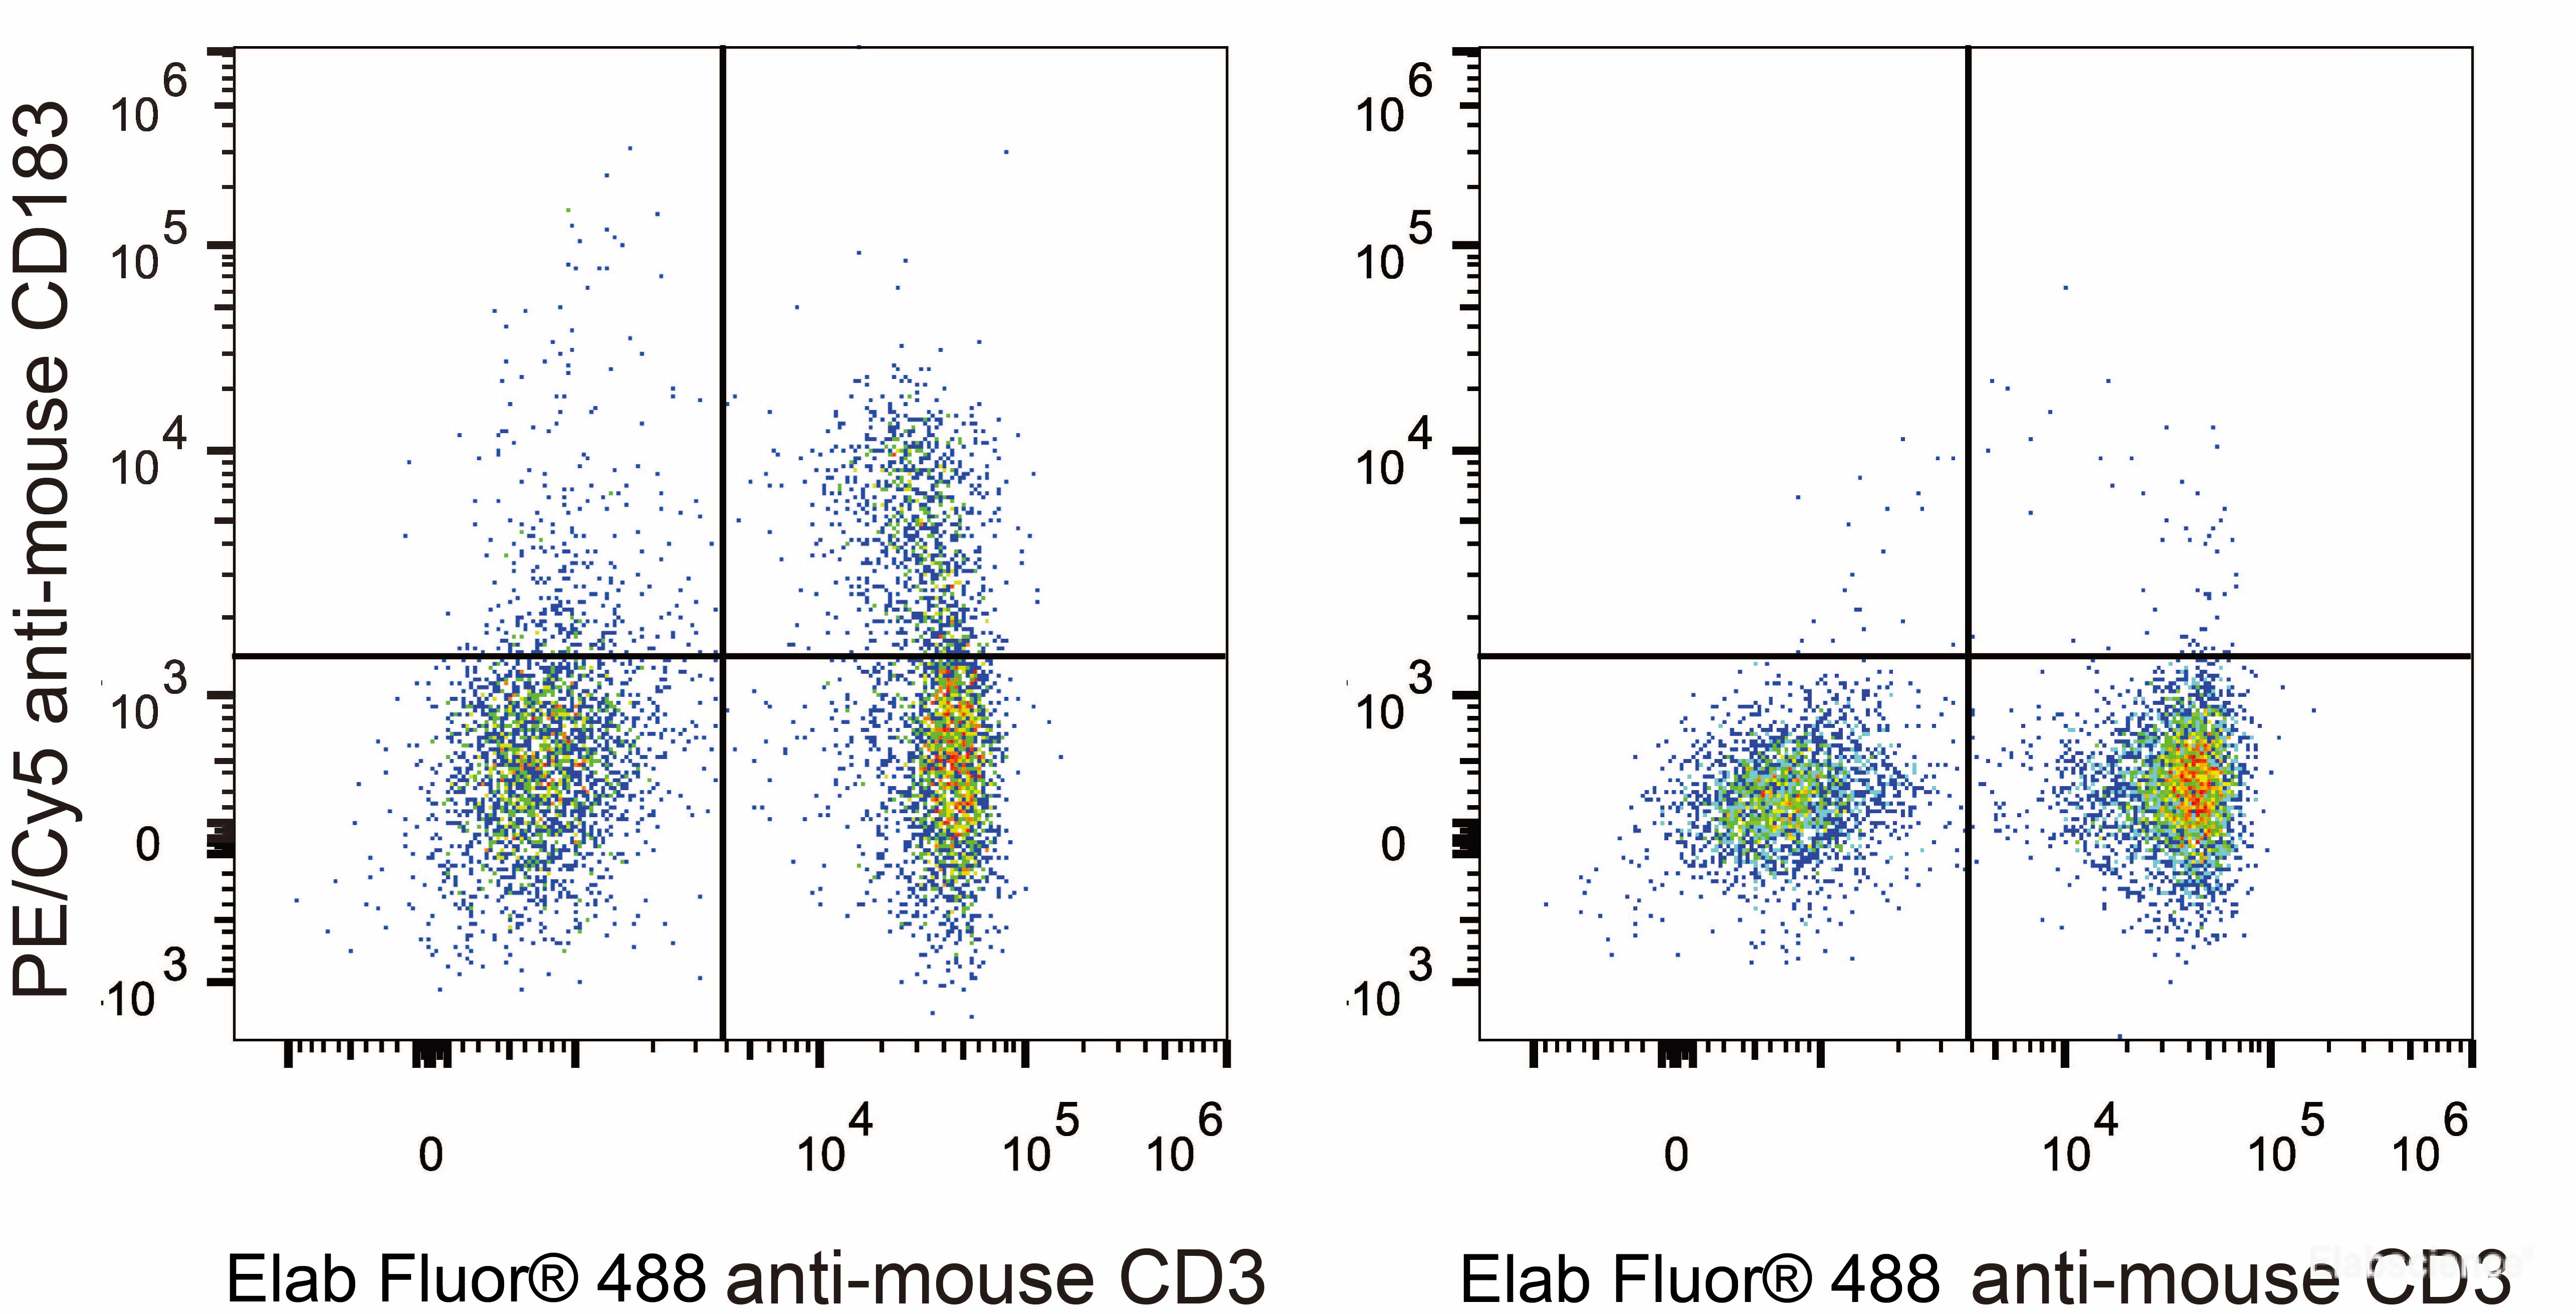 C57BL/6 murine splenocytes are stained with PE/Cyanine5 Anti-Mouse CD183/CXCR3 Antibody and Elab Fluor<sup>®</sup> 488 Anti-Mouse CD3 Antibody (Left). Splenocytes stained with Elab Fluor<sup>®</sup> 488 Anti-Mouse CD3 Antibody Antibody (Right) are used as control.